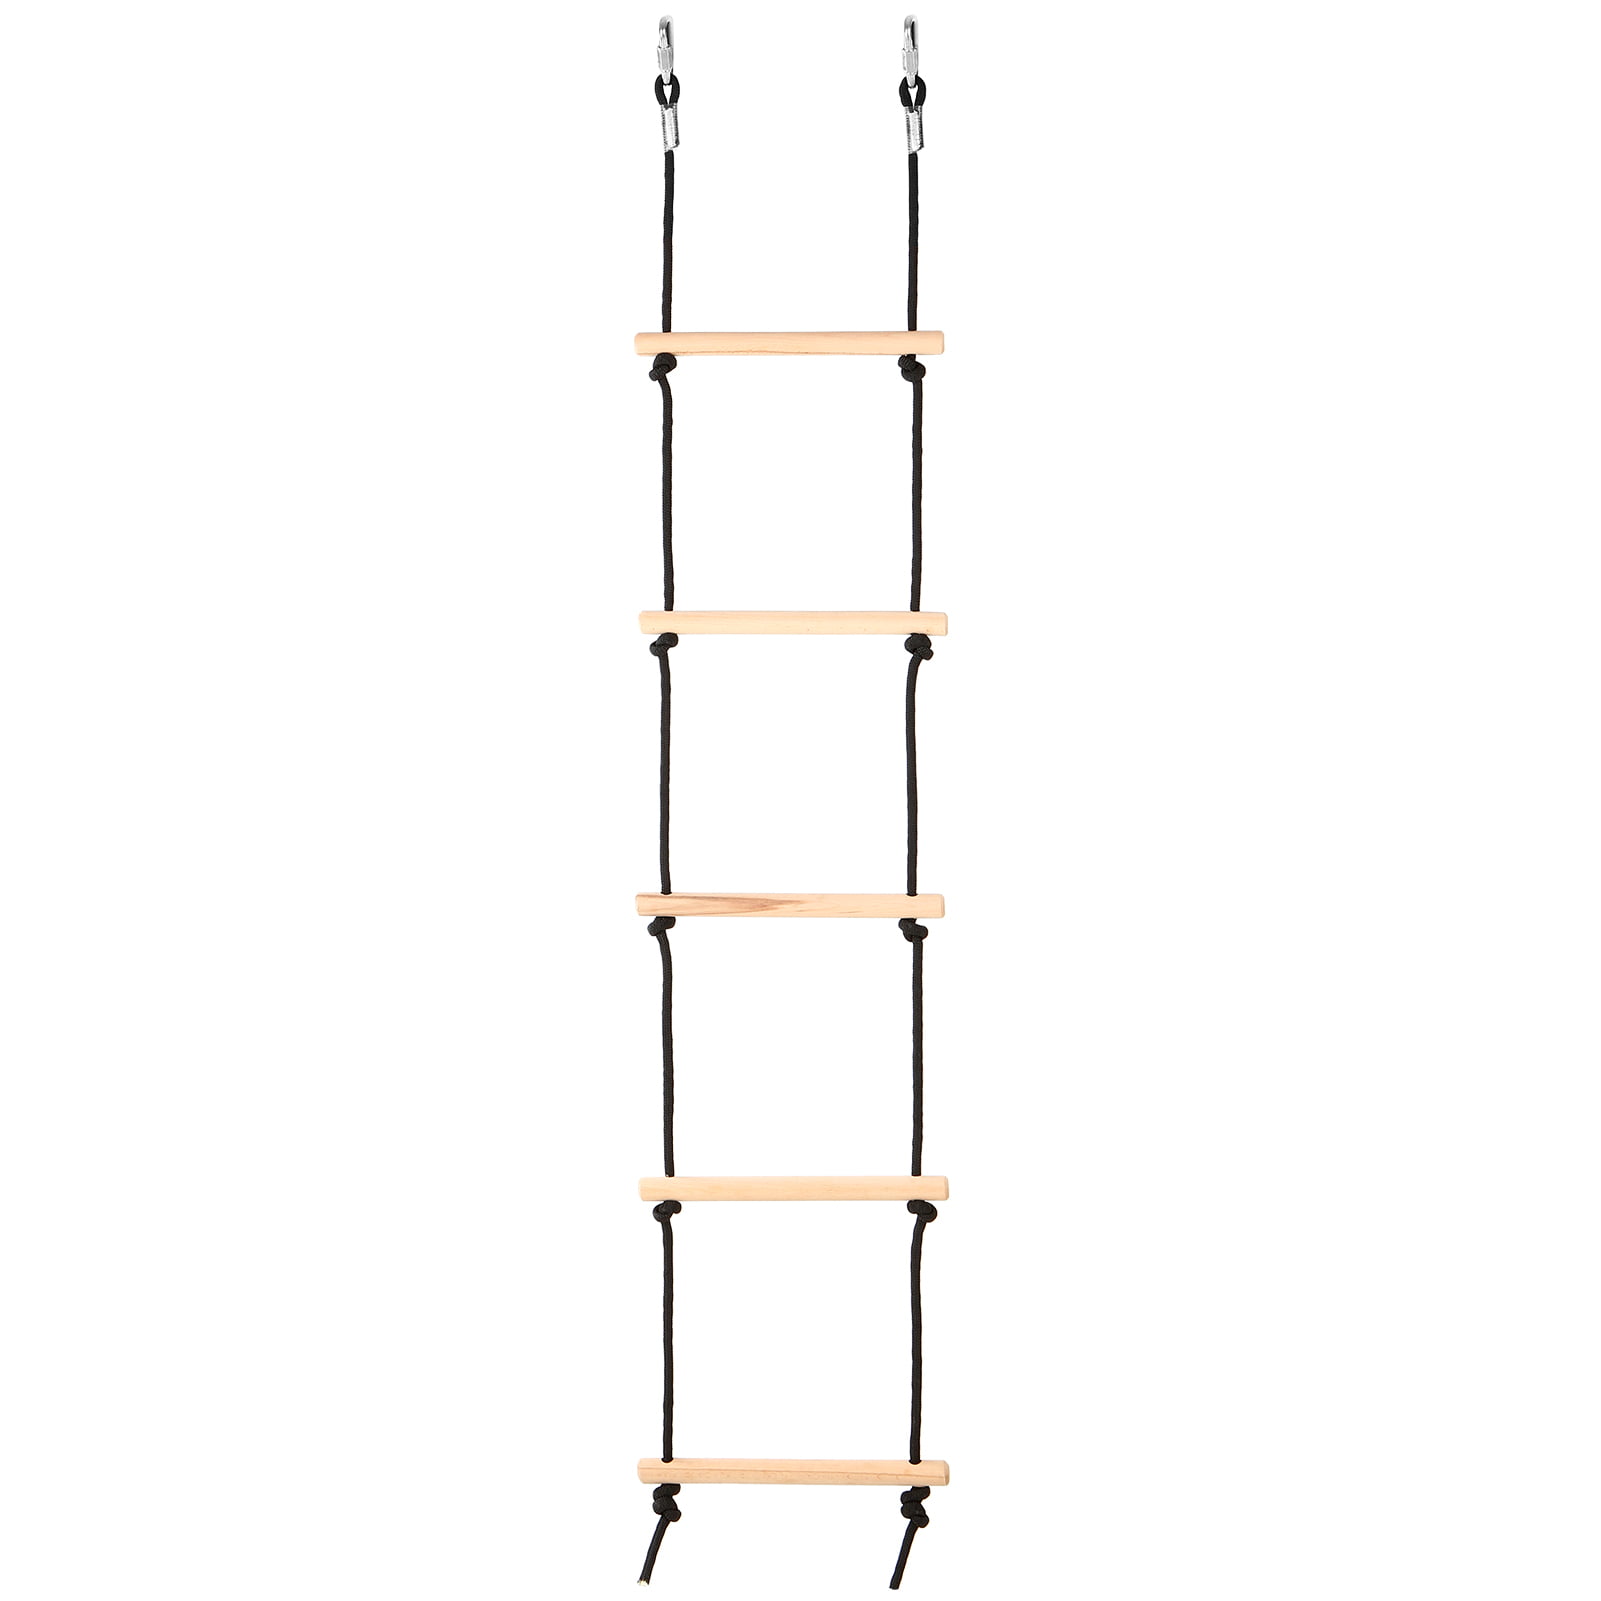 5 Stage Wooden Climbing Rope Ladder Playground Climbing Wooden Rope Ladder Tree Ladder Toy for Kids Adventure Games Wood Color 